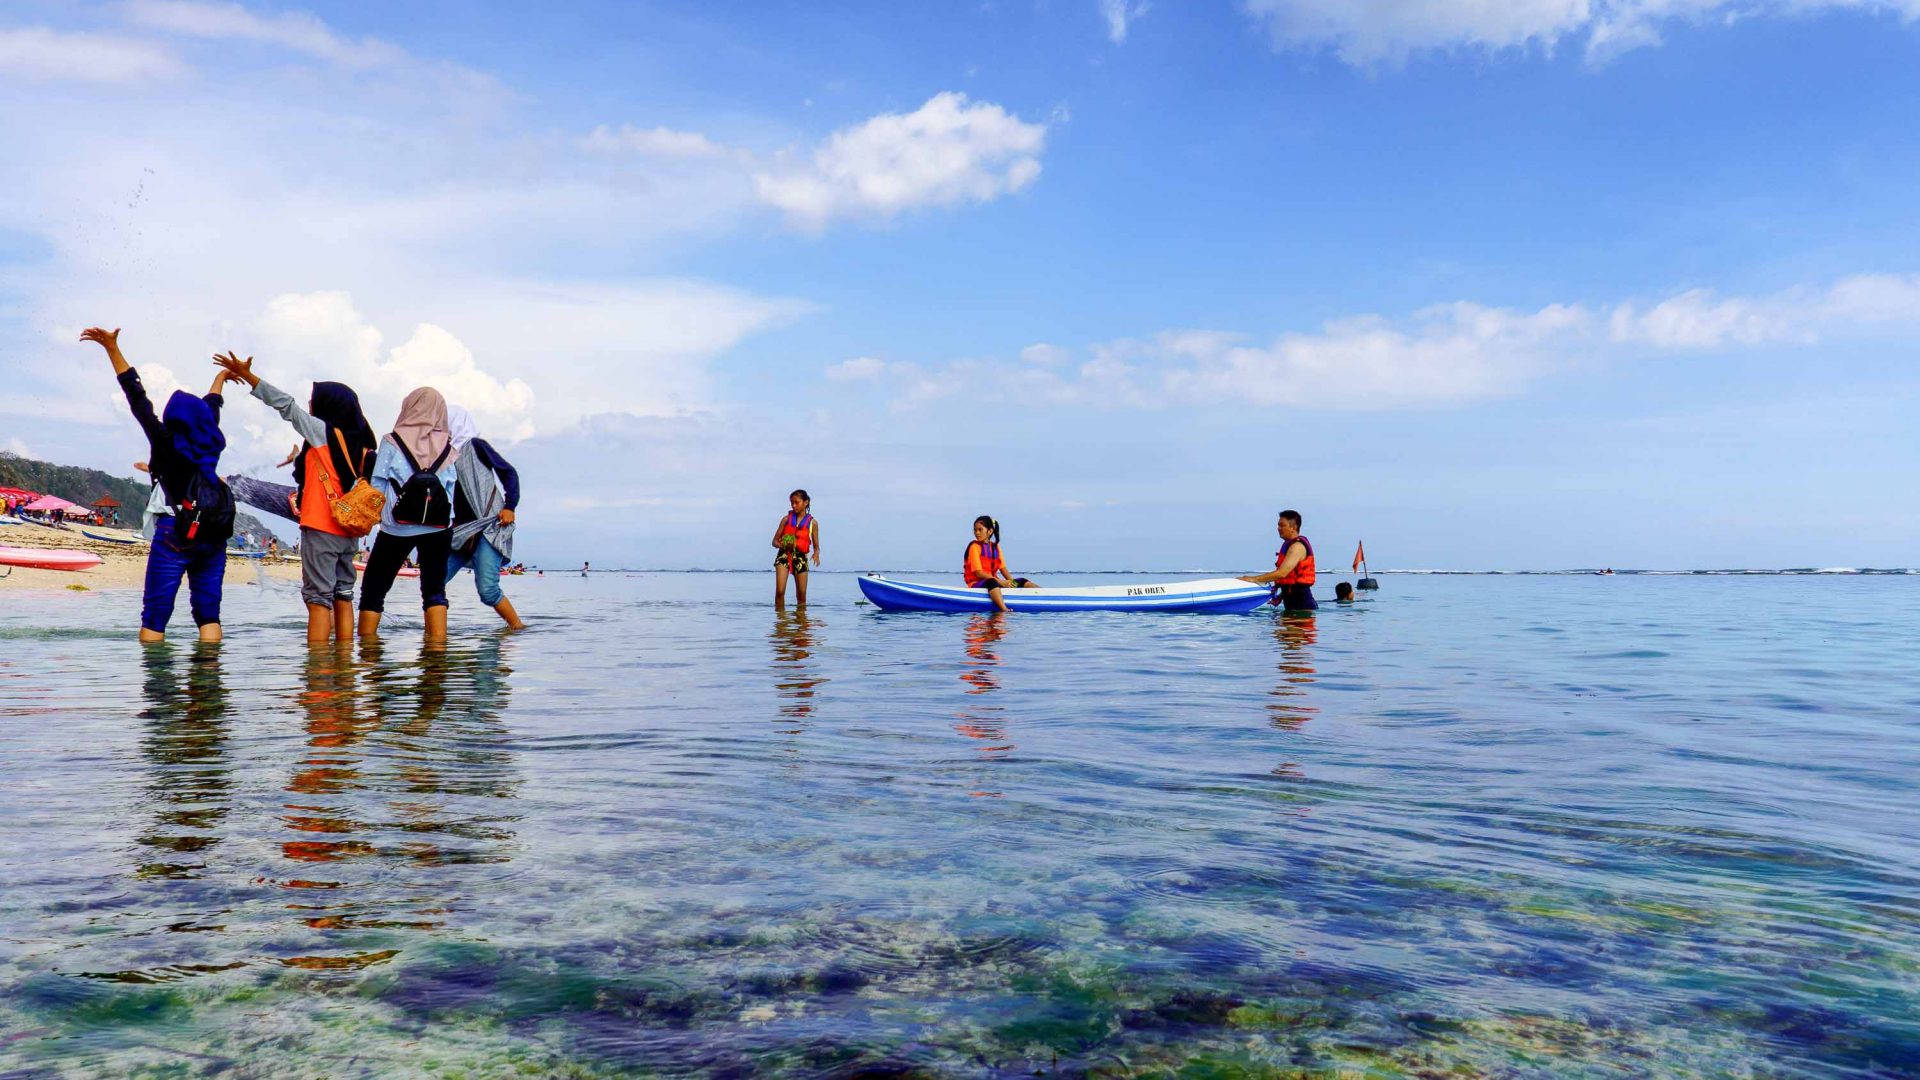 People smile for a photo while standing in reef water.